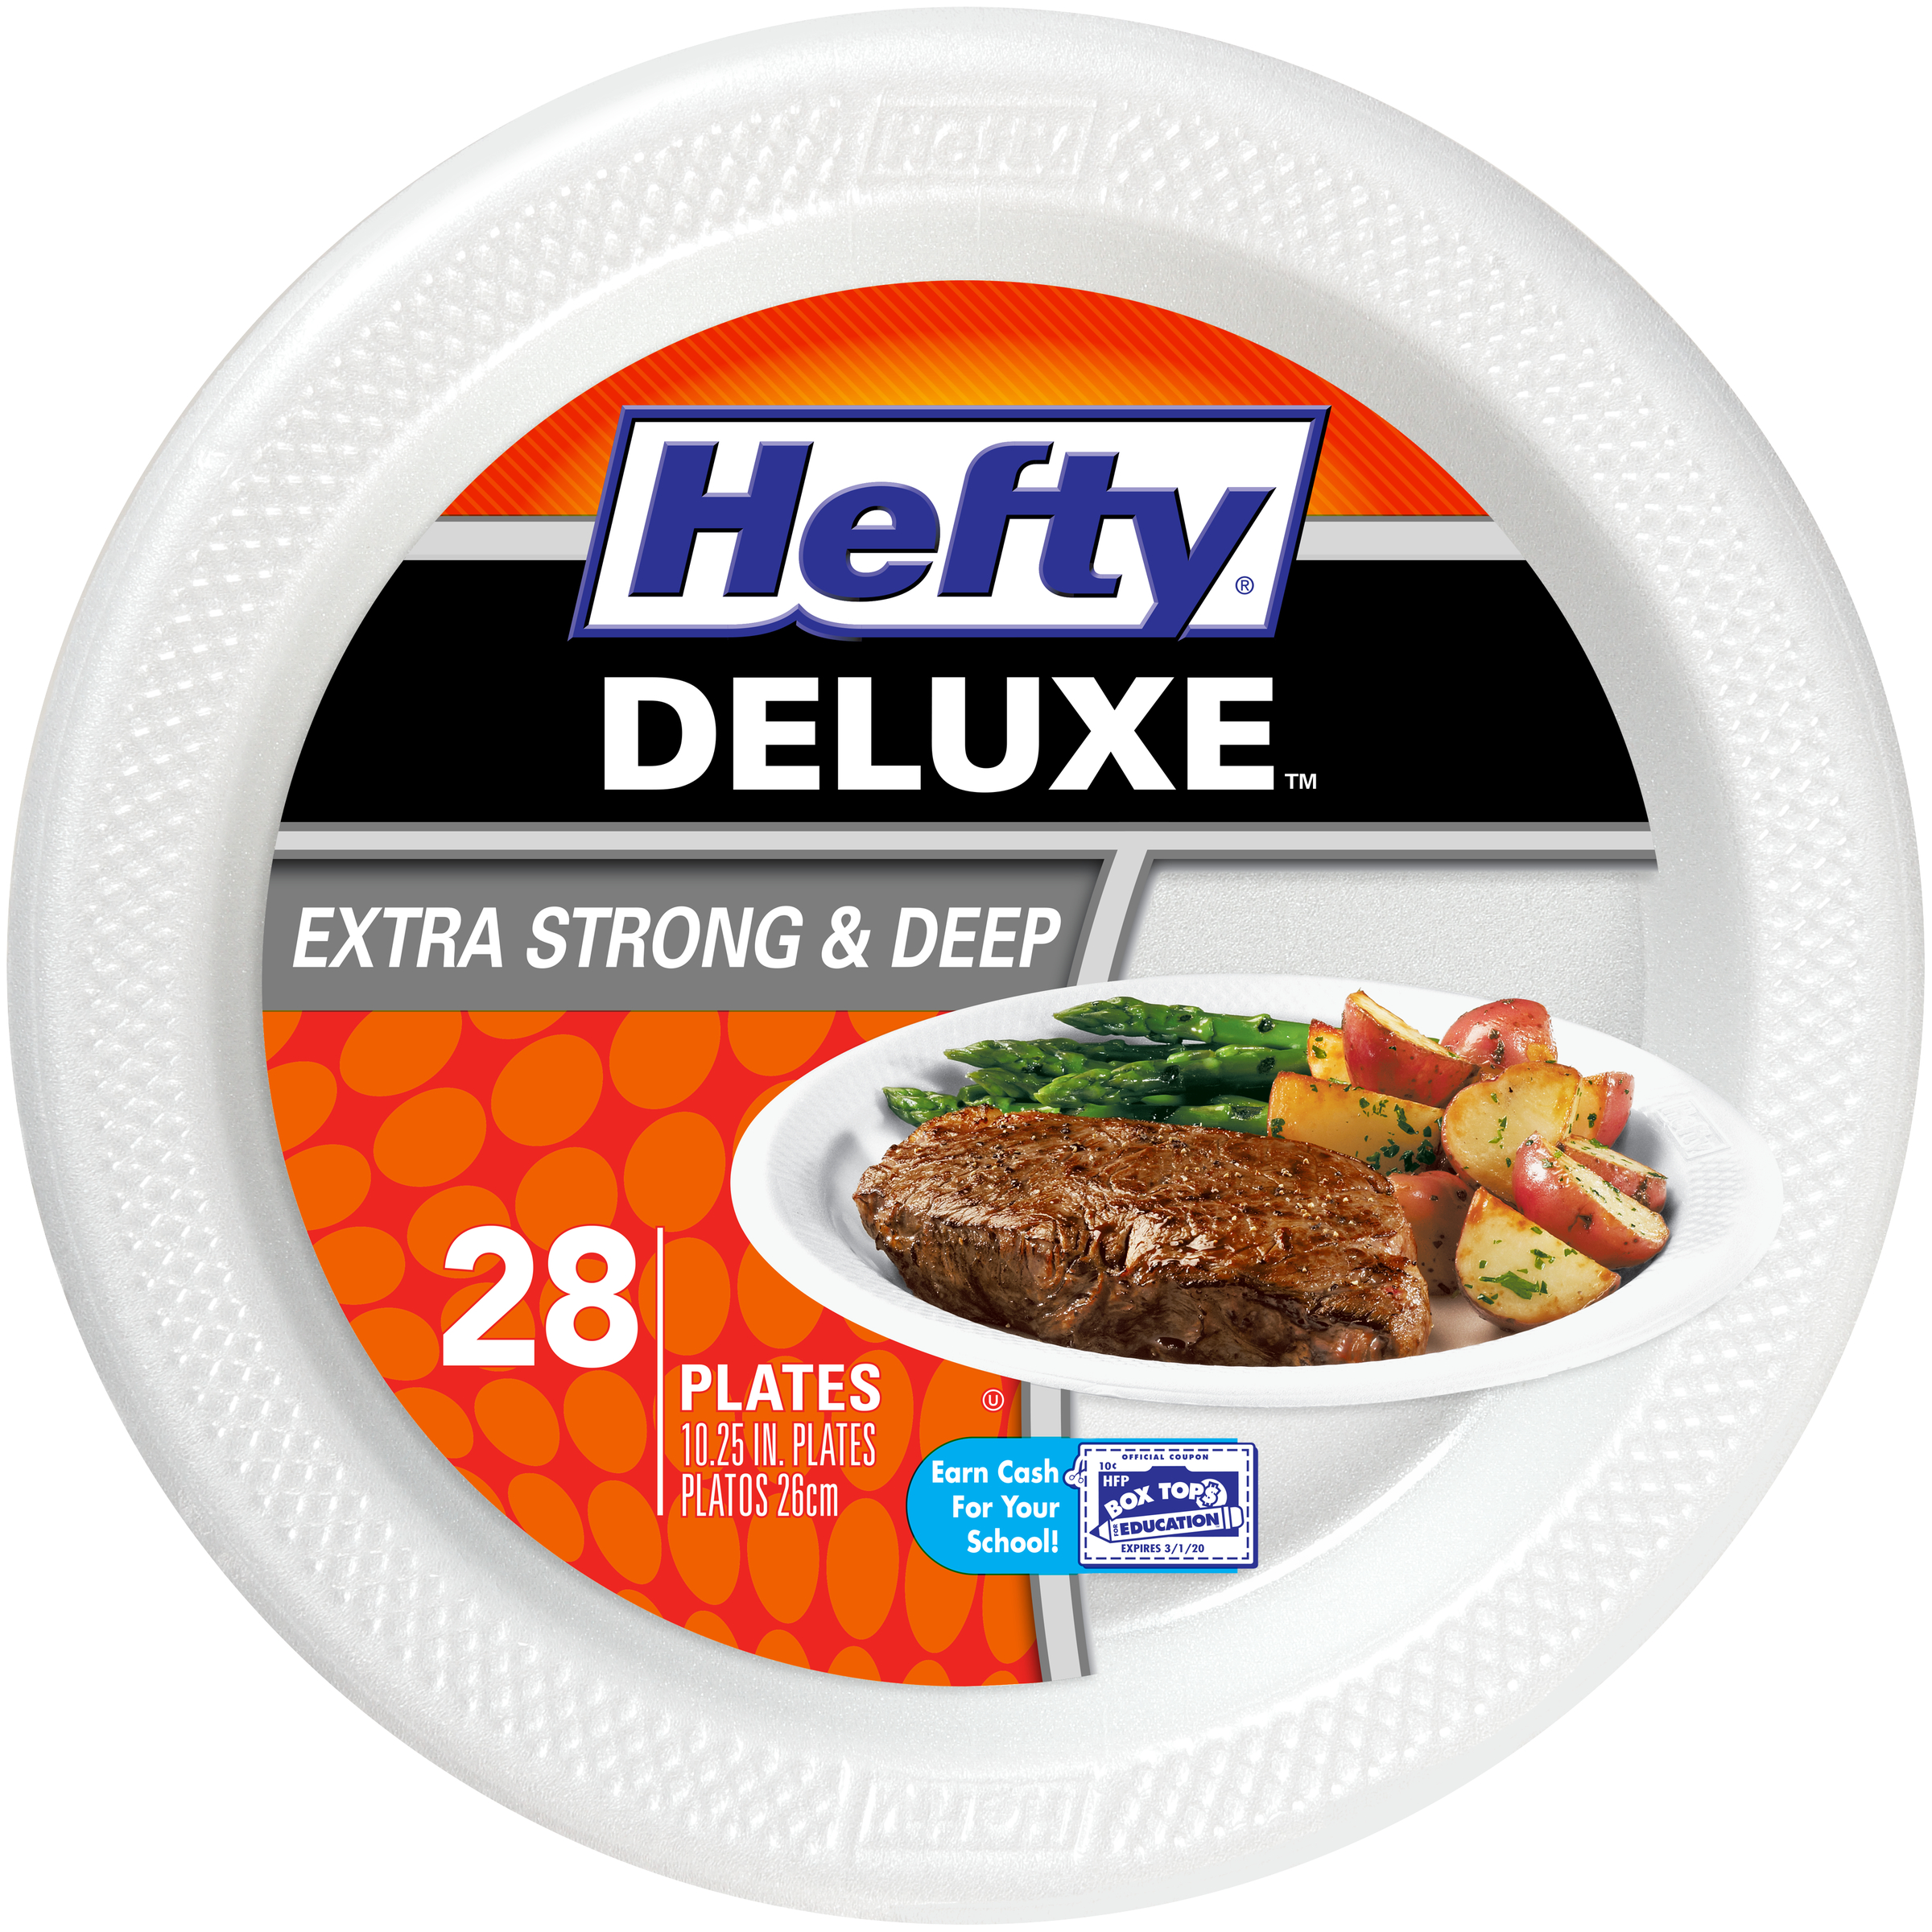 Hefty Deluxe Large Round Foam Party Plates, 28 Count - image 1 of 6